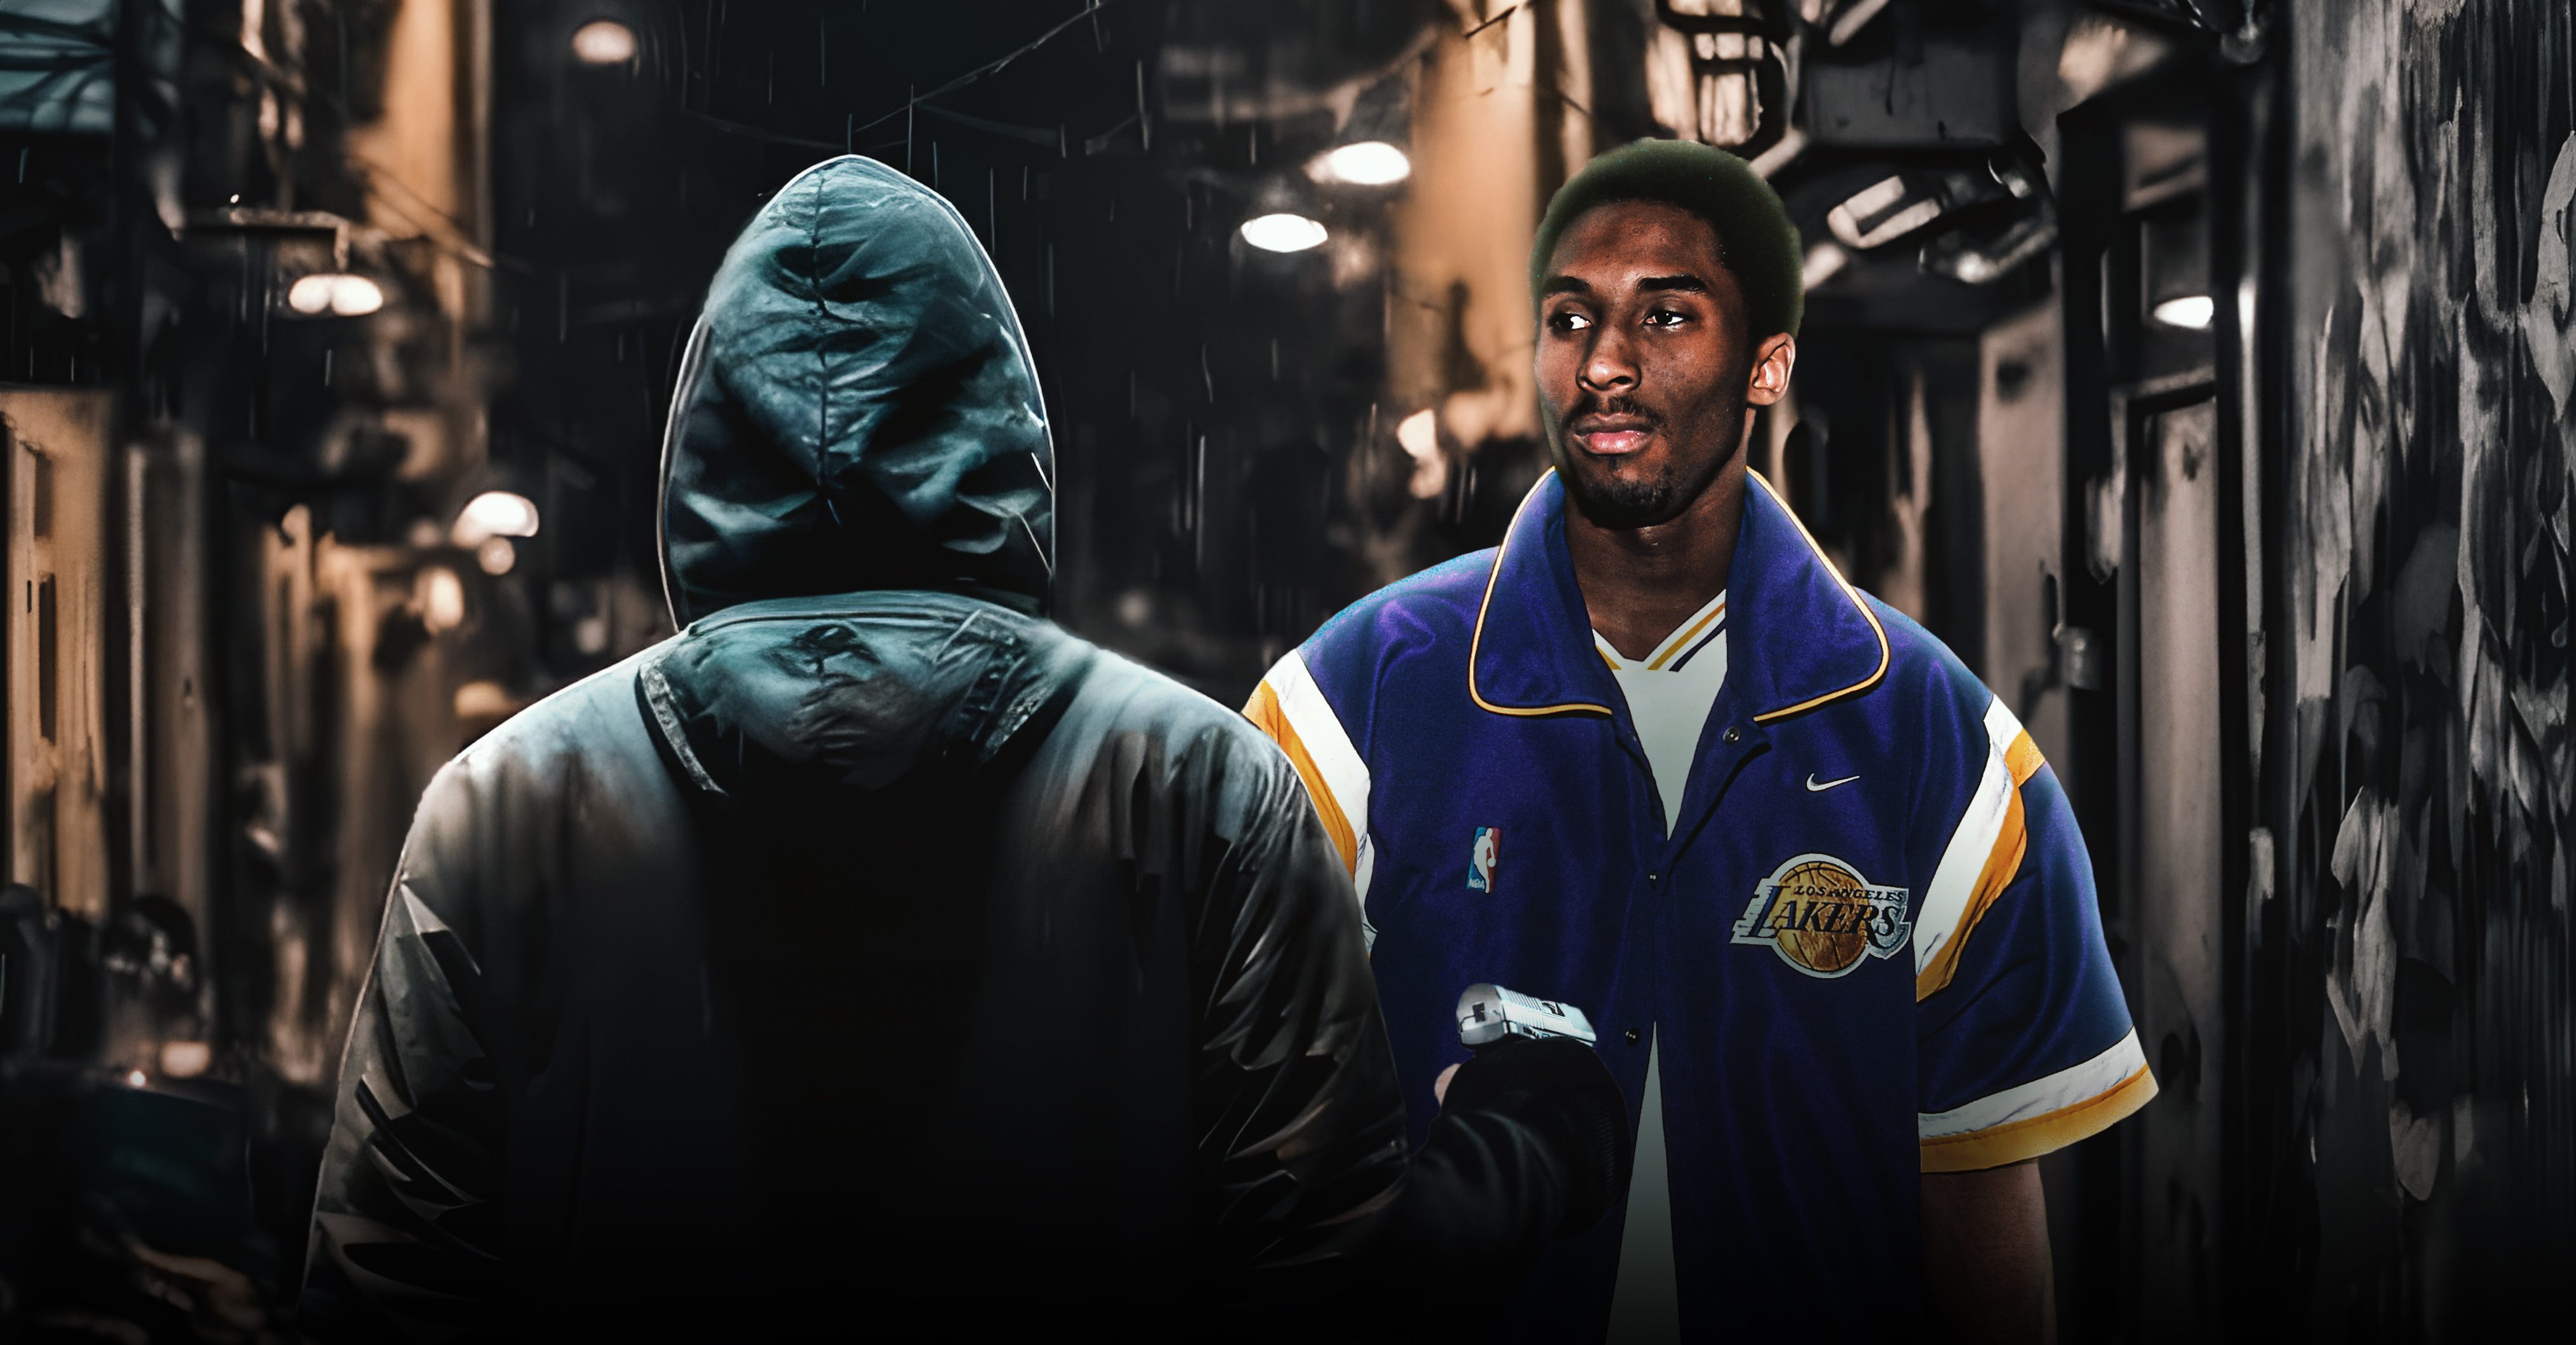 Kobe Bryant’s Incredible Reaction When NYC Gangster Pulled Gun On Him